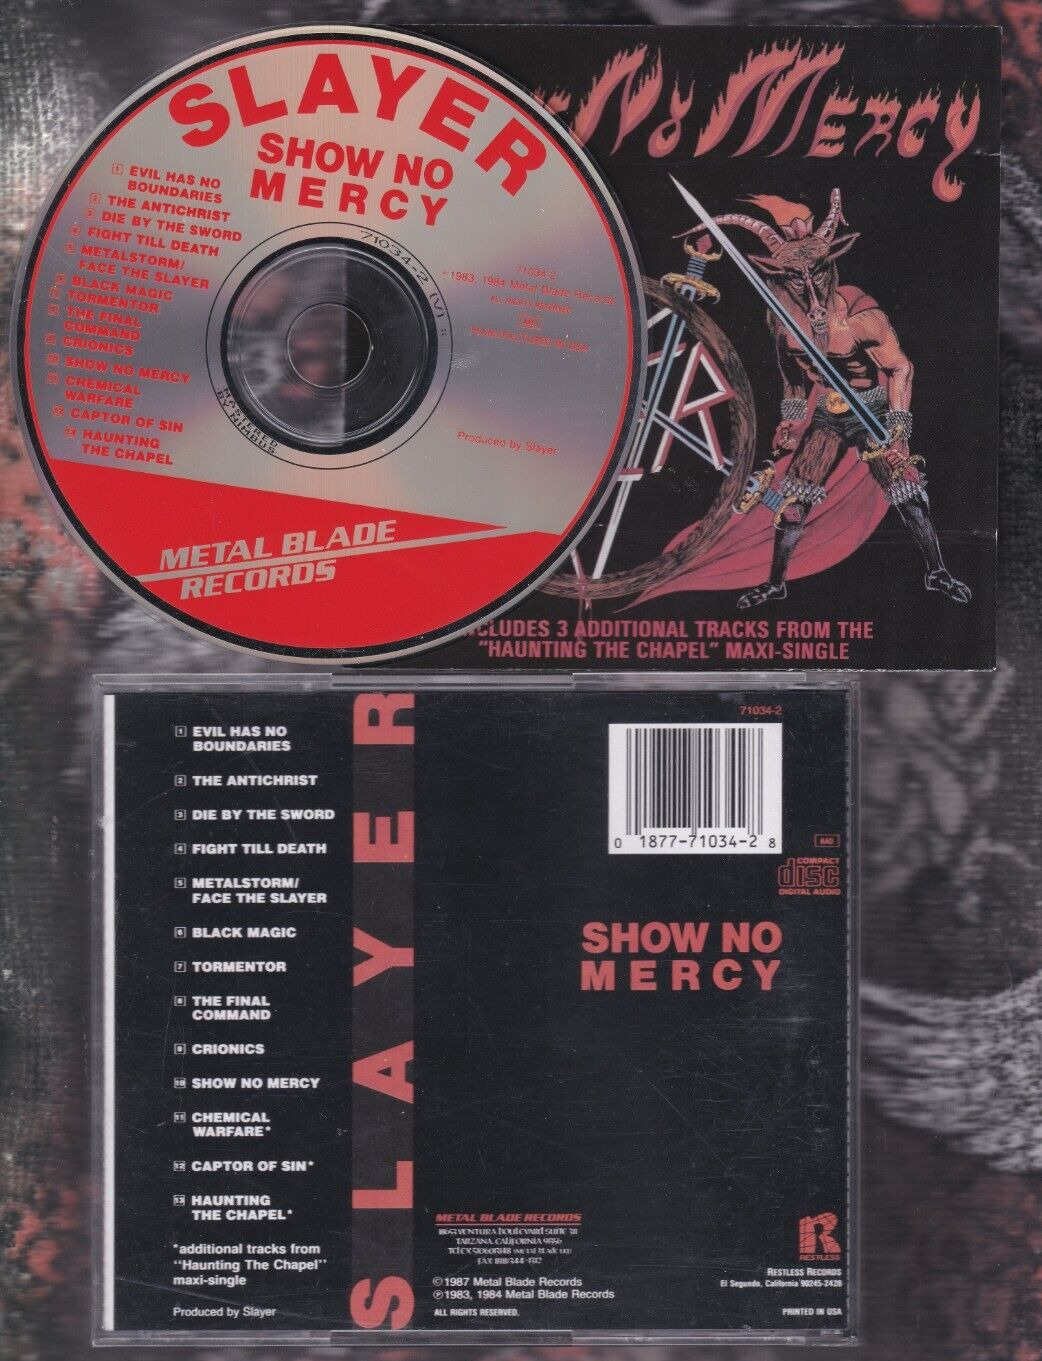 CD SLAYER Show No Mercy 1983/Haunting The Chapel Restless Red Print Disc 70134-2